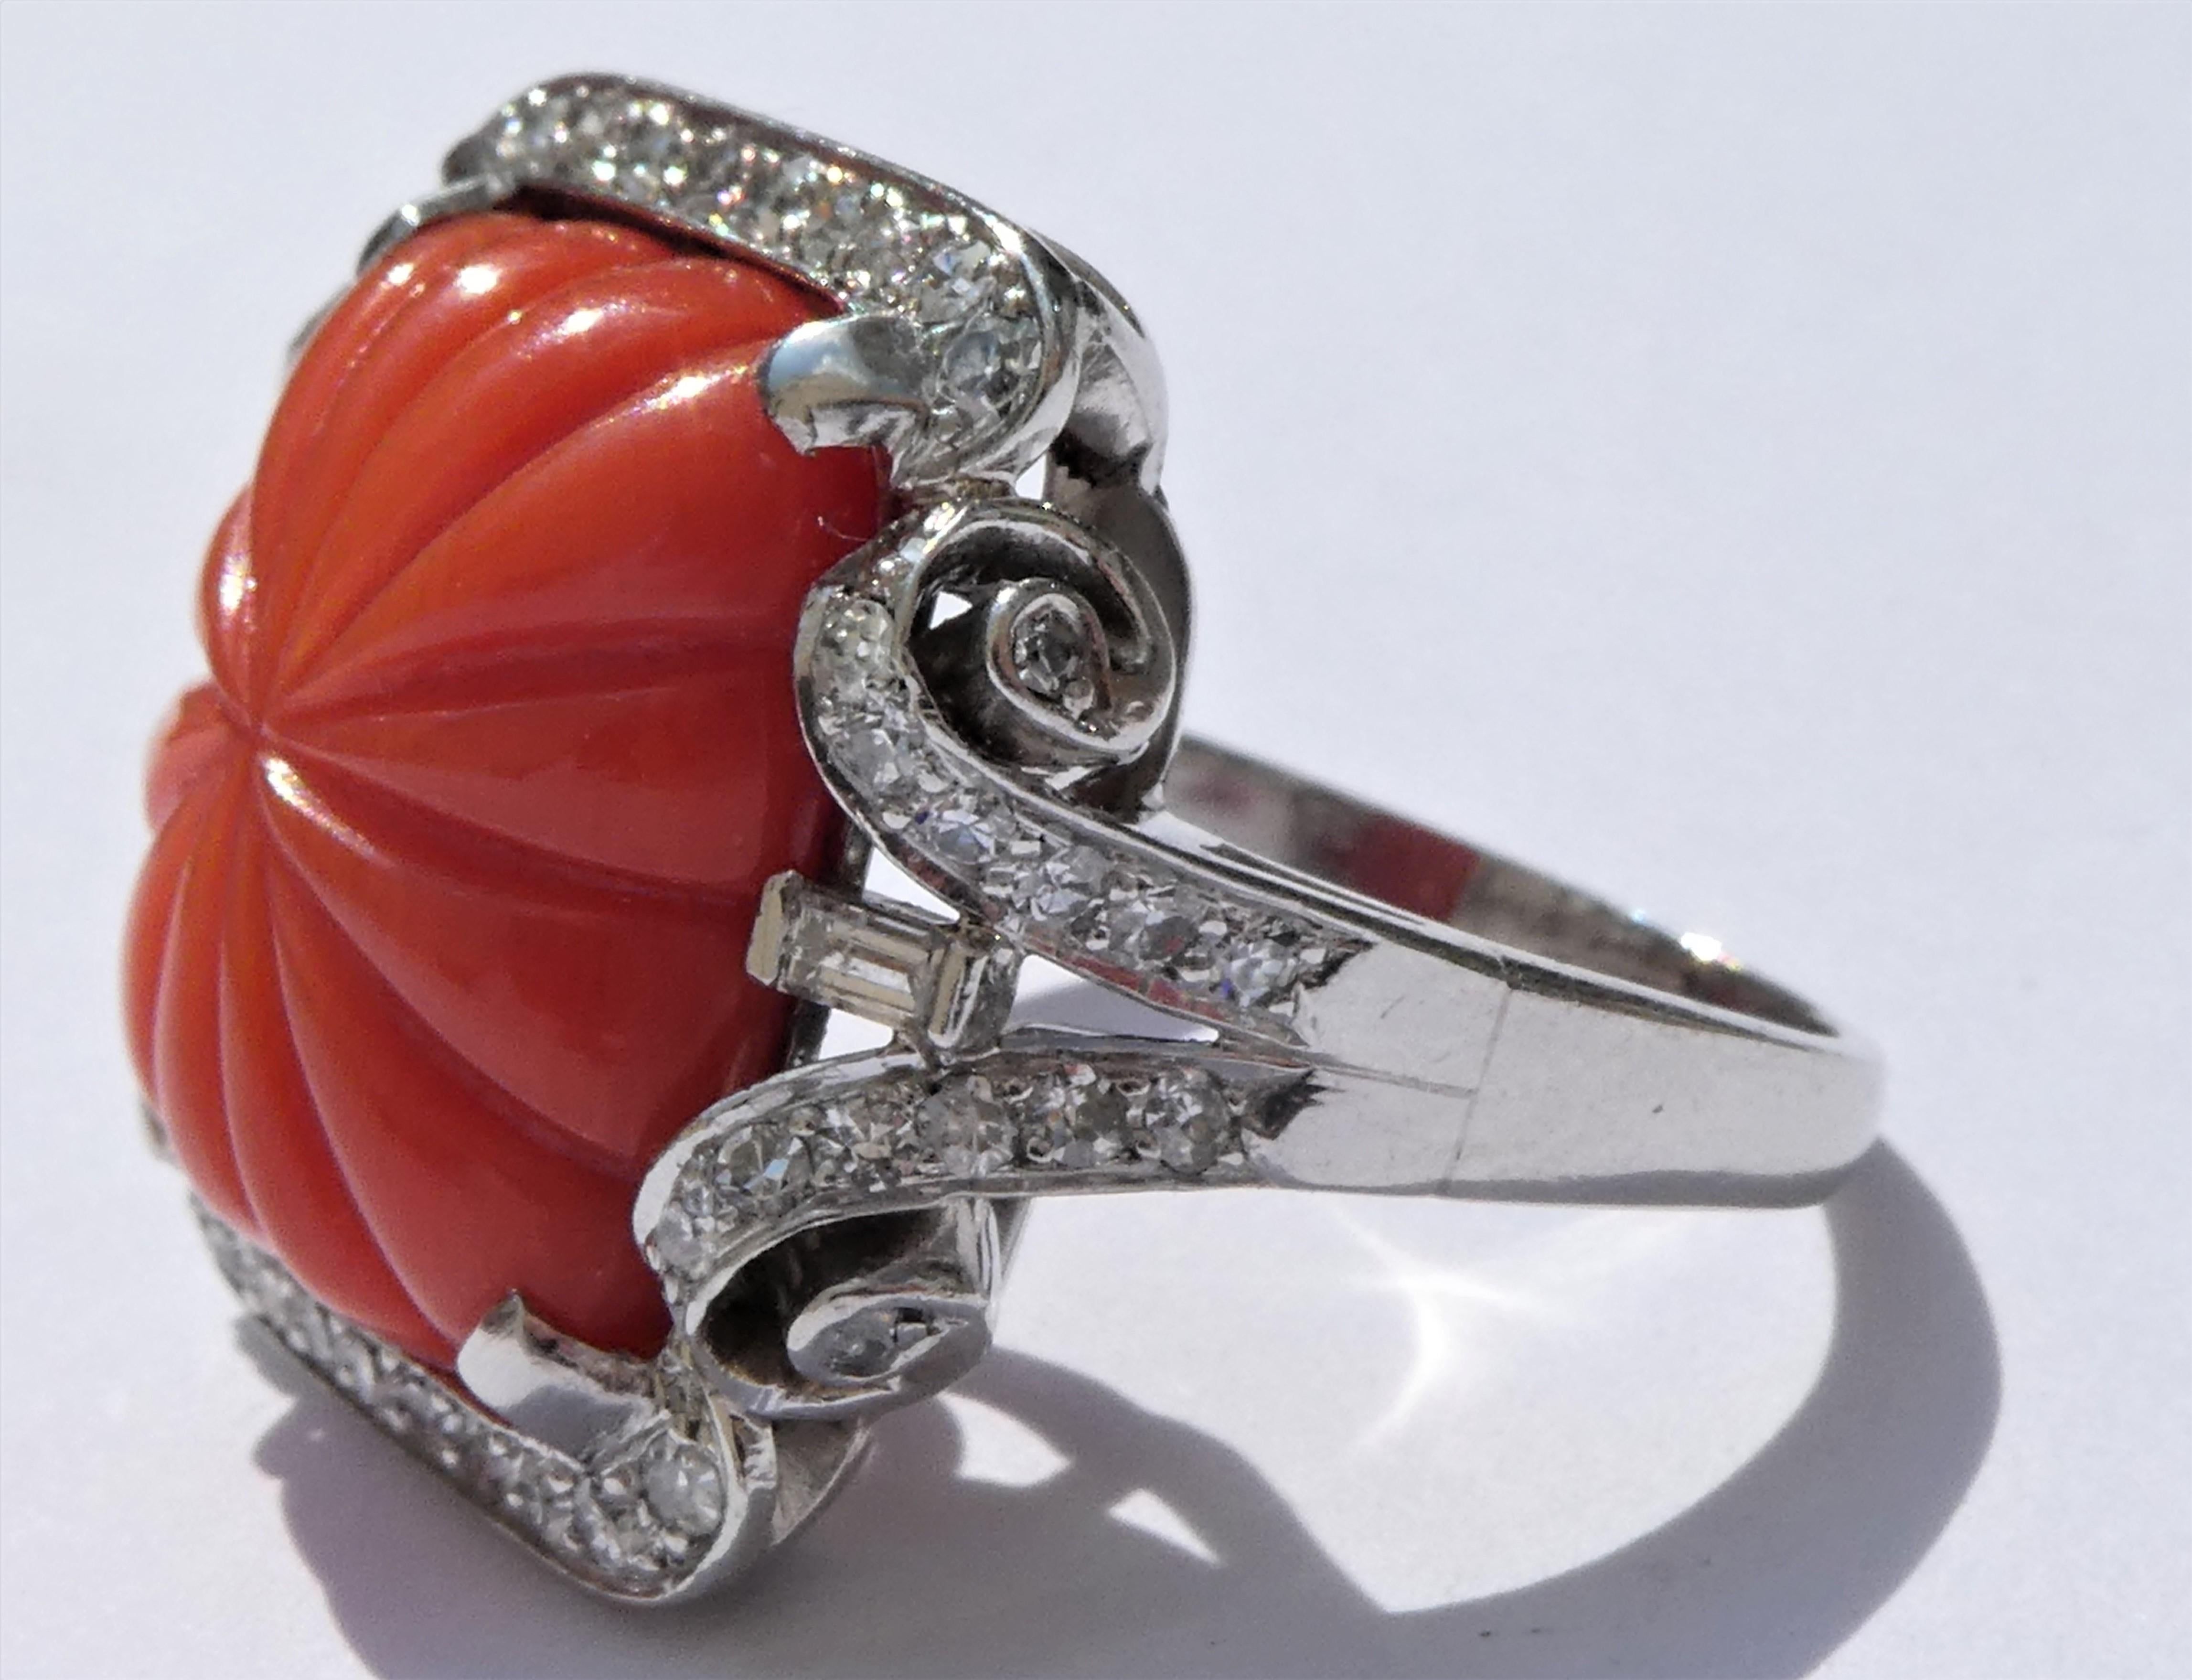 This ring was crafted circa 1930 in platinum with a carved domed Sardegna coral cabochon from the island of Sardinia in the center. Accentuating the red coral there are 52 round single cut diamonds and 2 diamonds in baguette cut with a total of